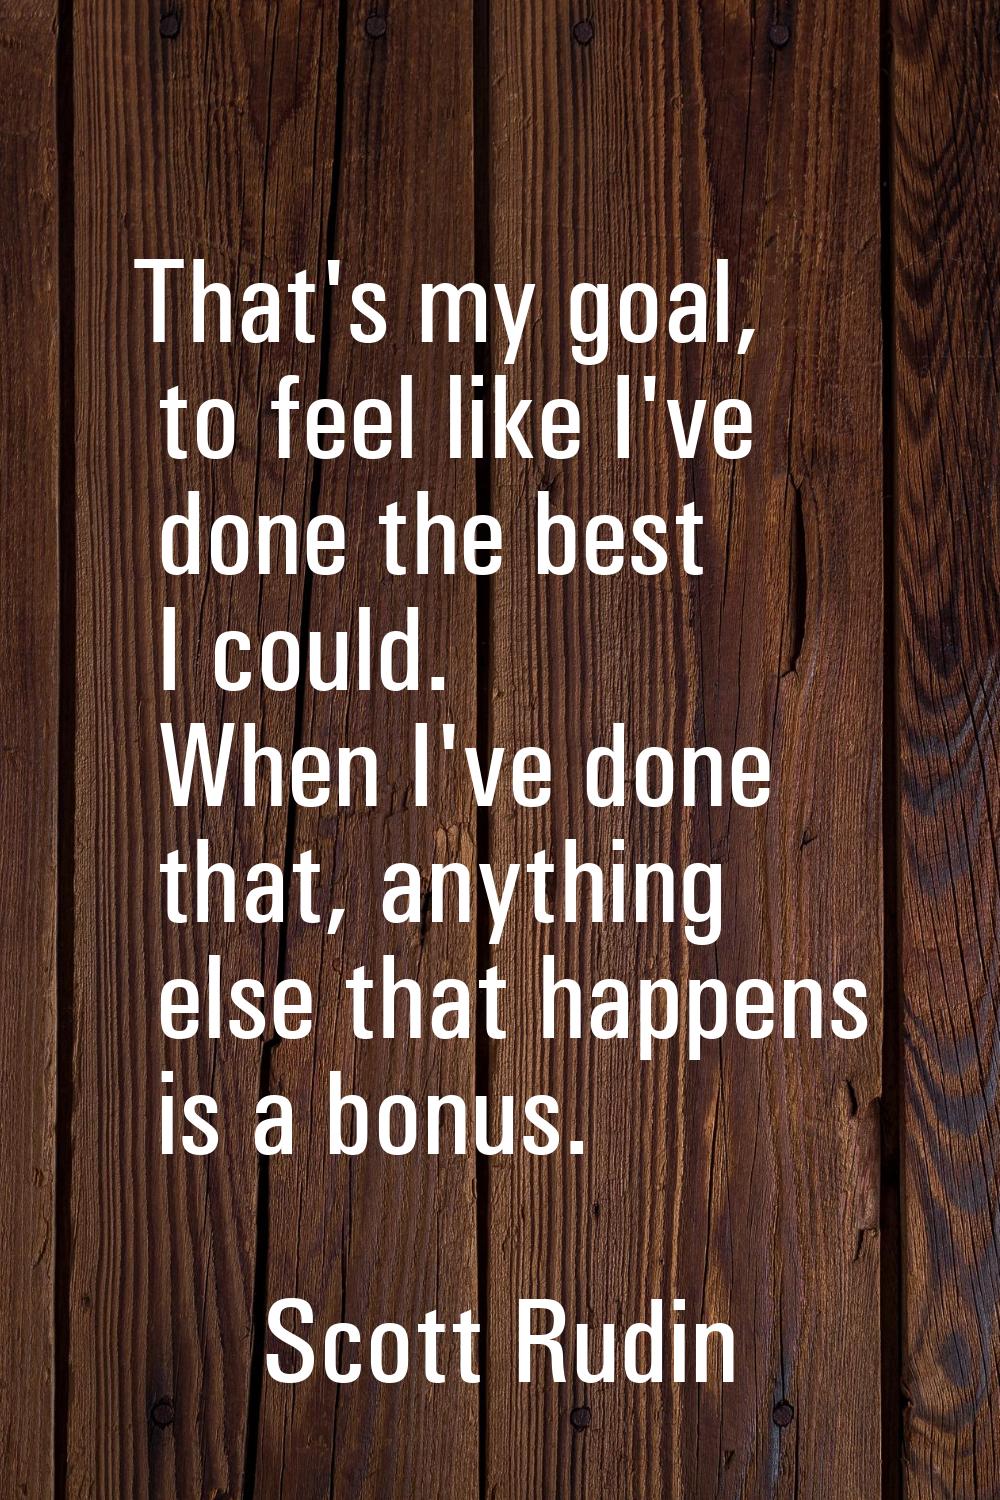 That's my goal, to feel like I've done the best I could. When I've done that, anything else that ha